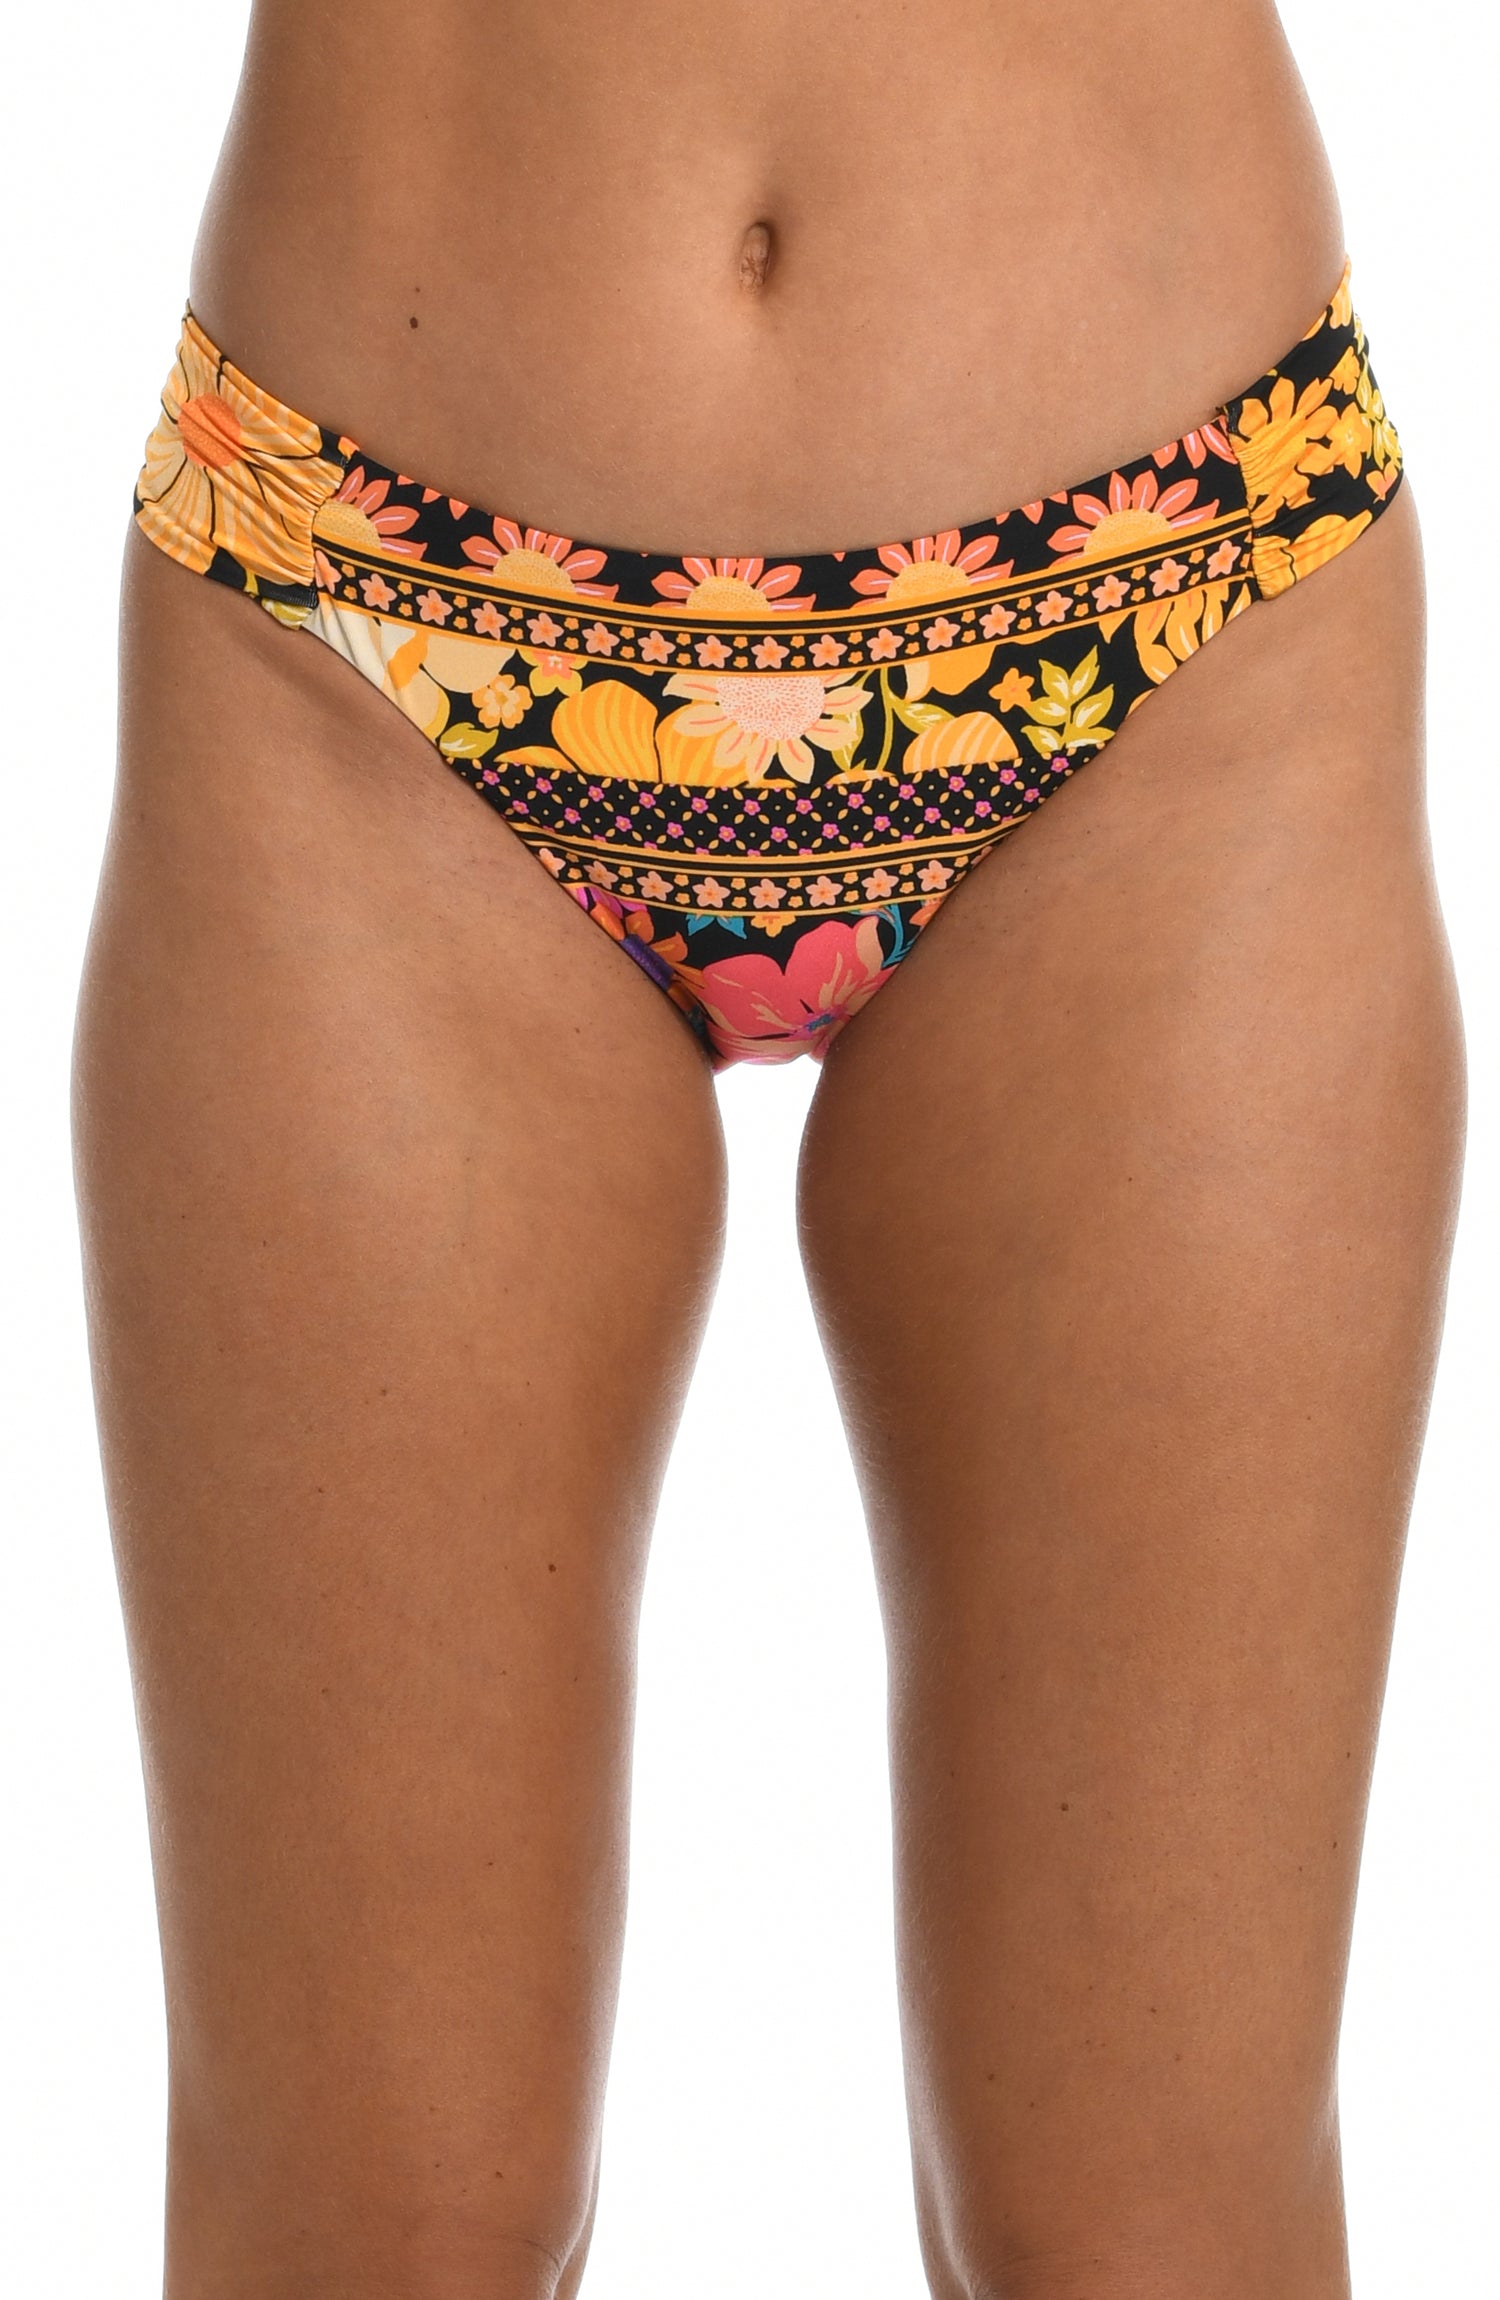 Model is wearing a yellow and pink multicolored retro inspired flower printed side shirred hipster swimsuit bottom from our Flower Power collection.